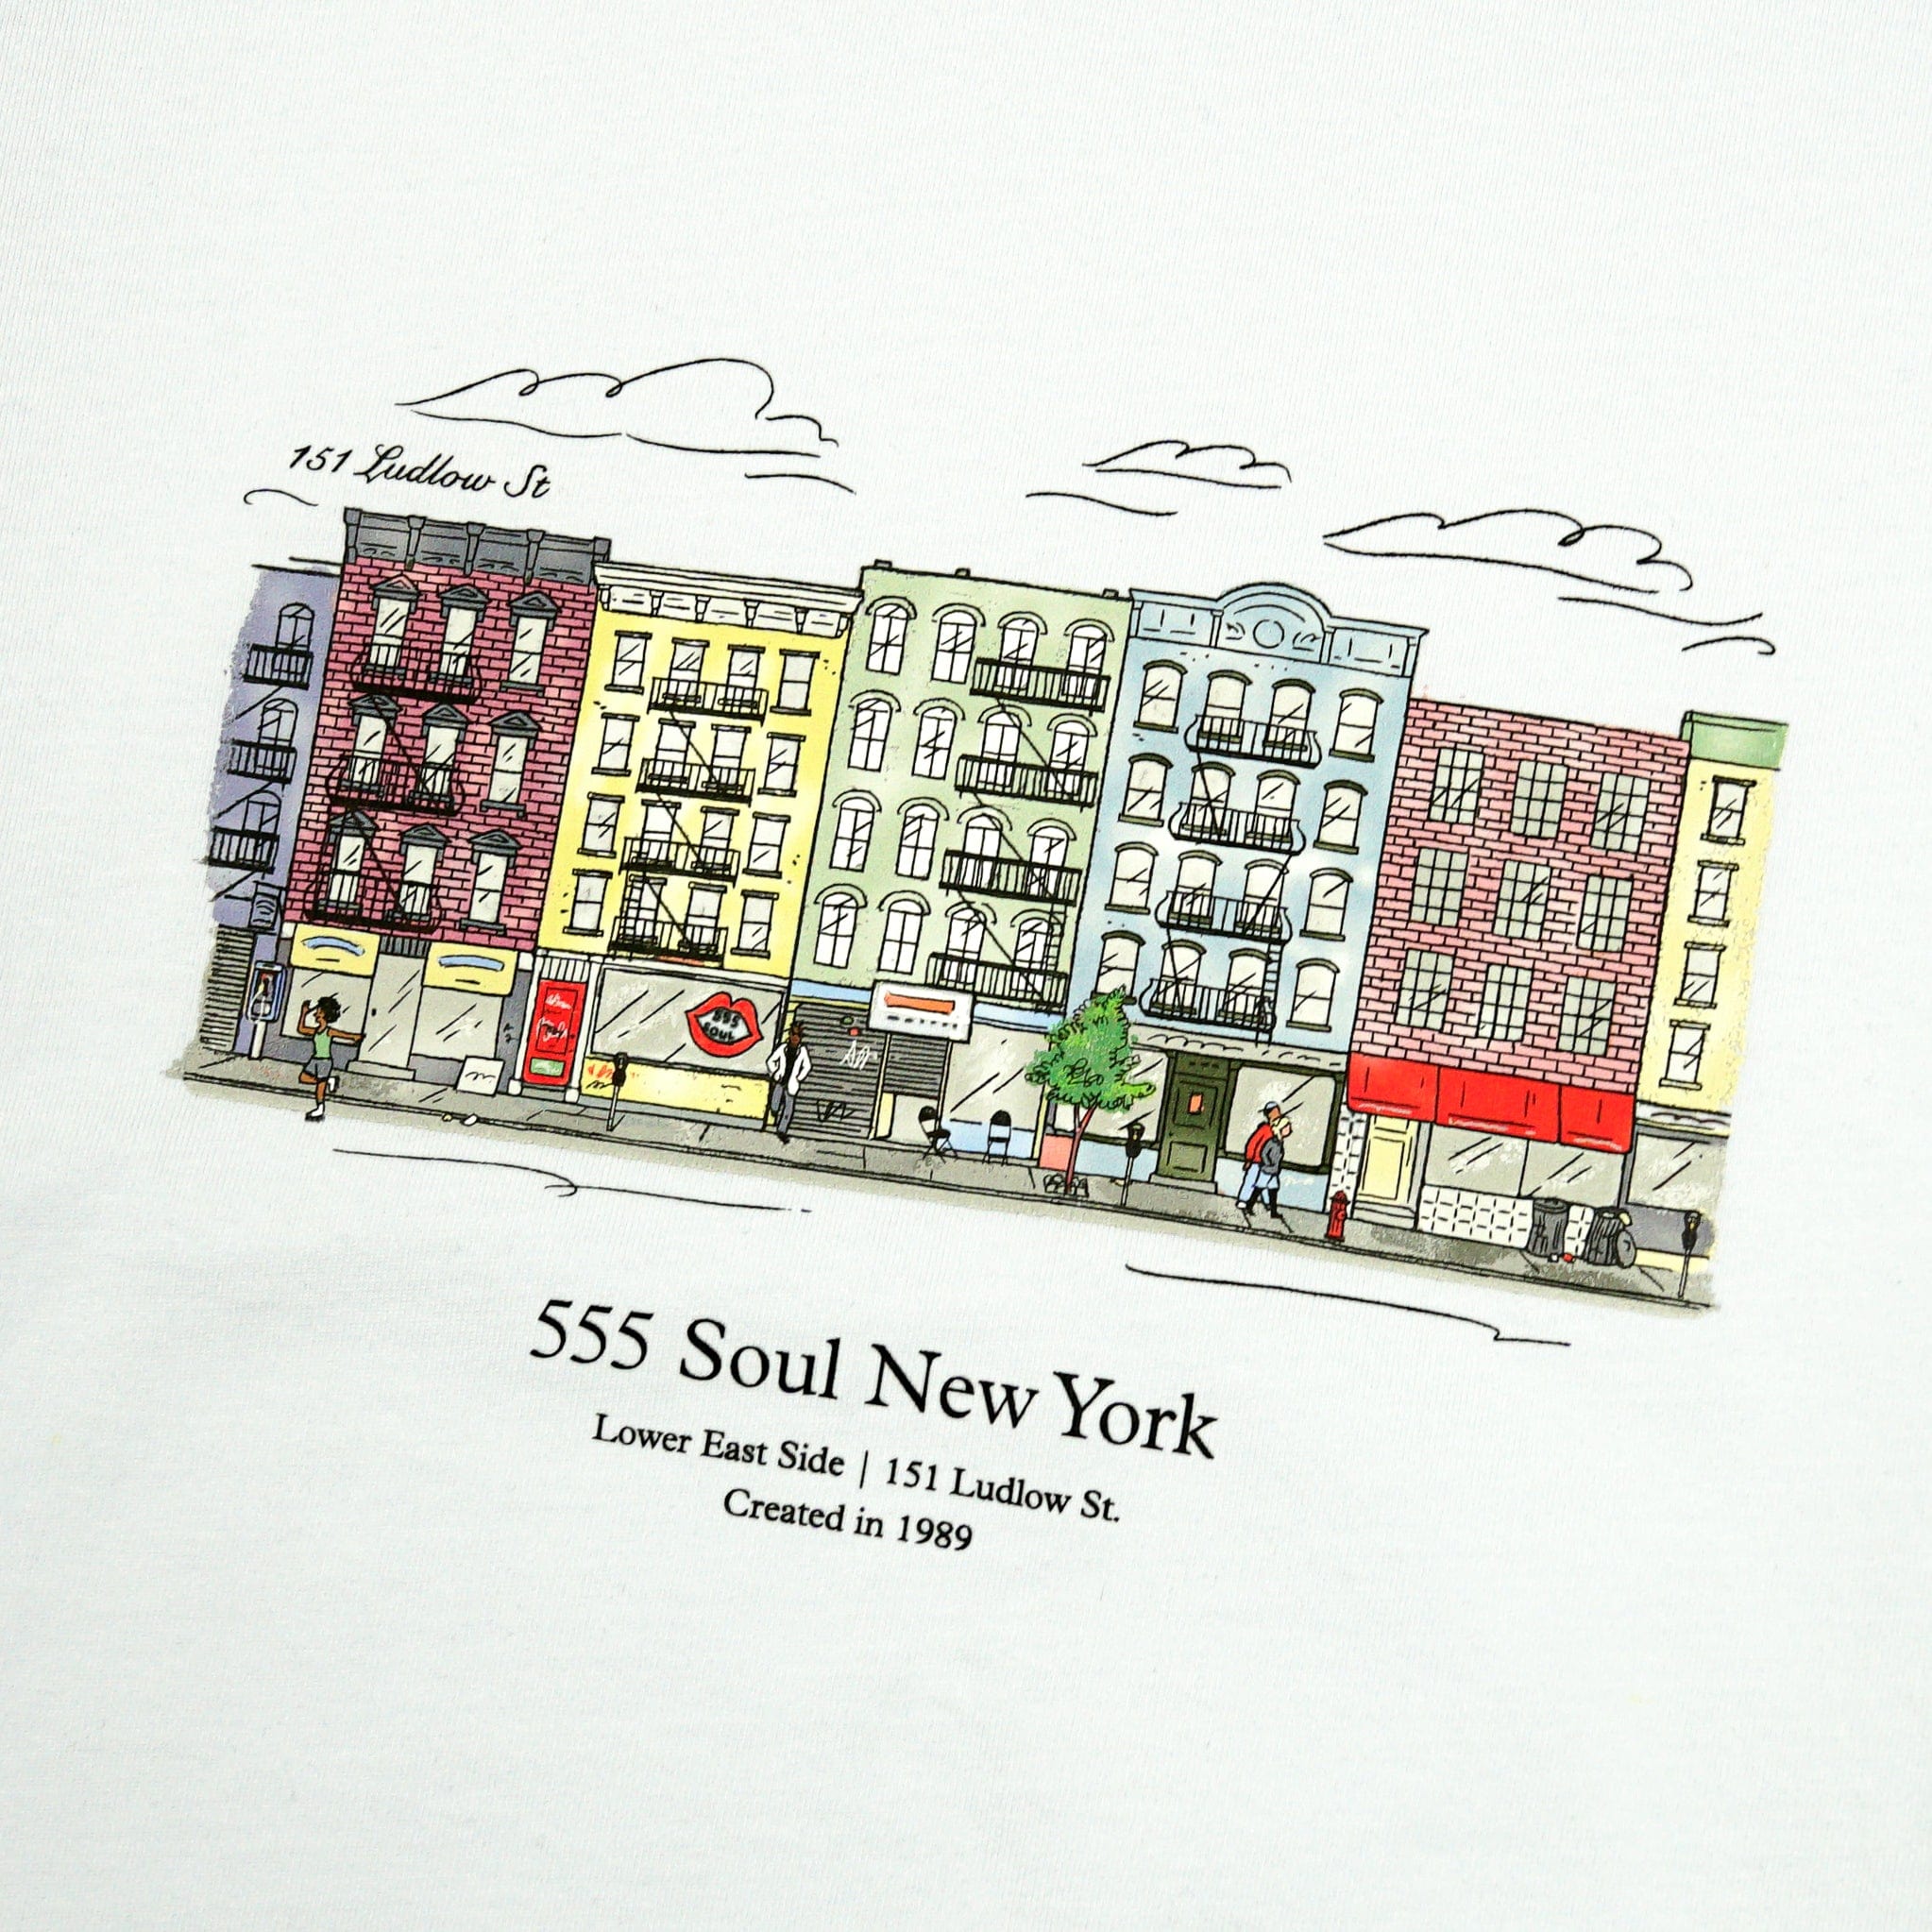 Ludlow St. Garment Dyed Tee in white